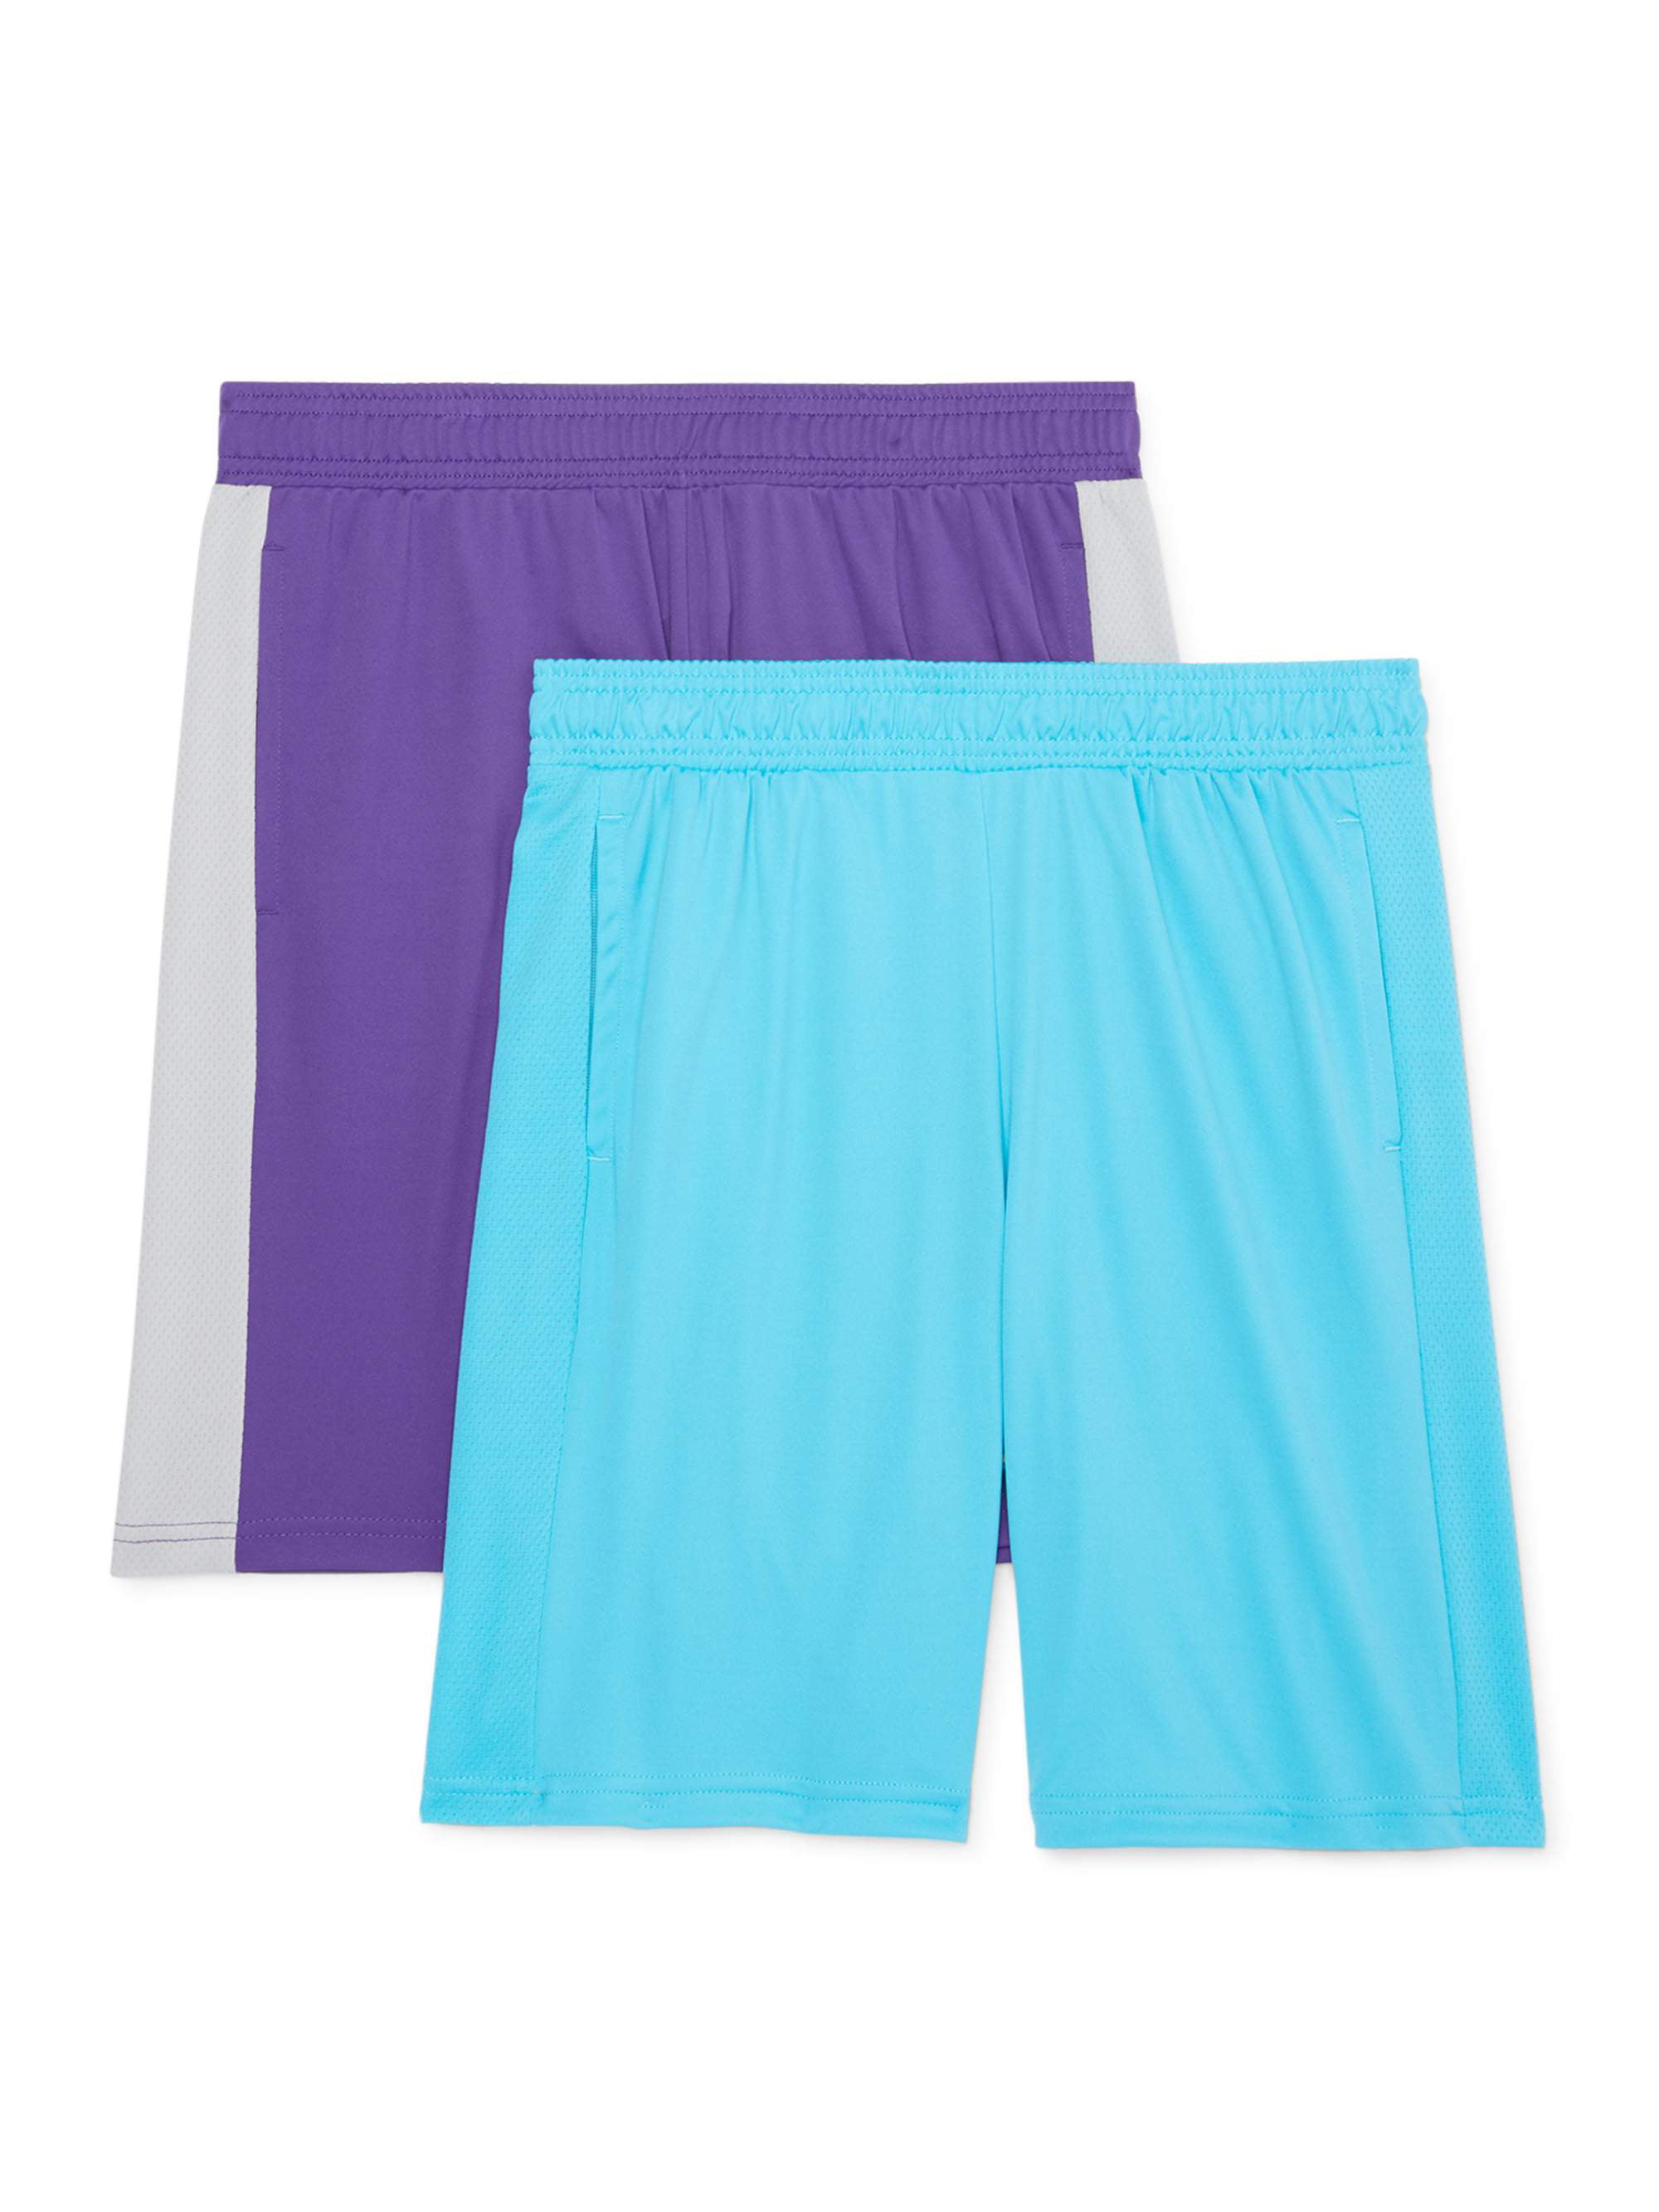 Athletic Sports Performance Wicking B-Core Pocketed Shorts 14 Colors, 10 Adult 10 /& 7 Youth 7 Sizes